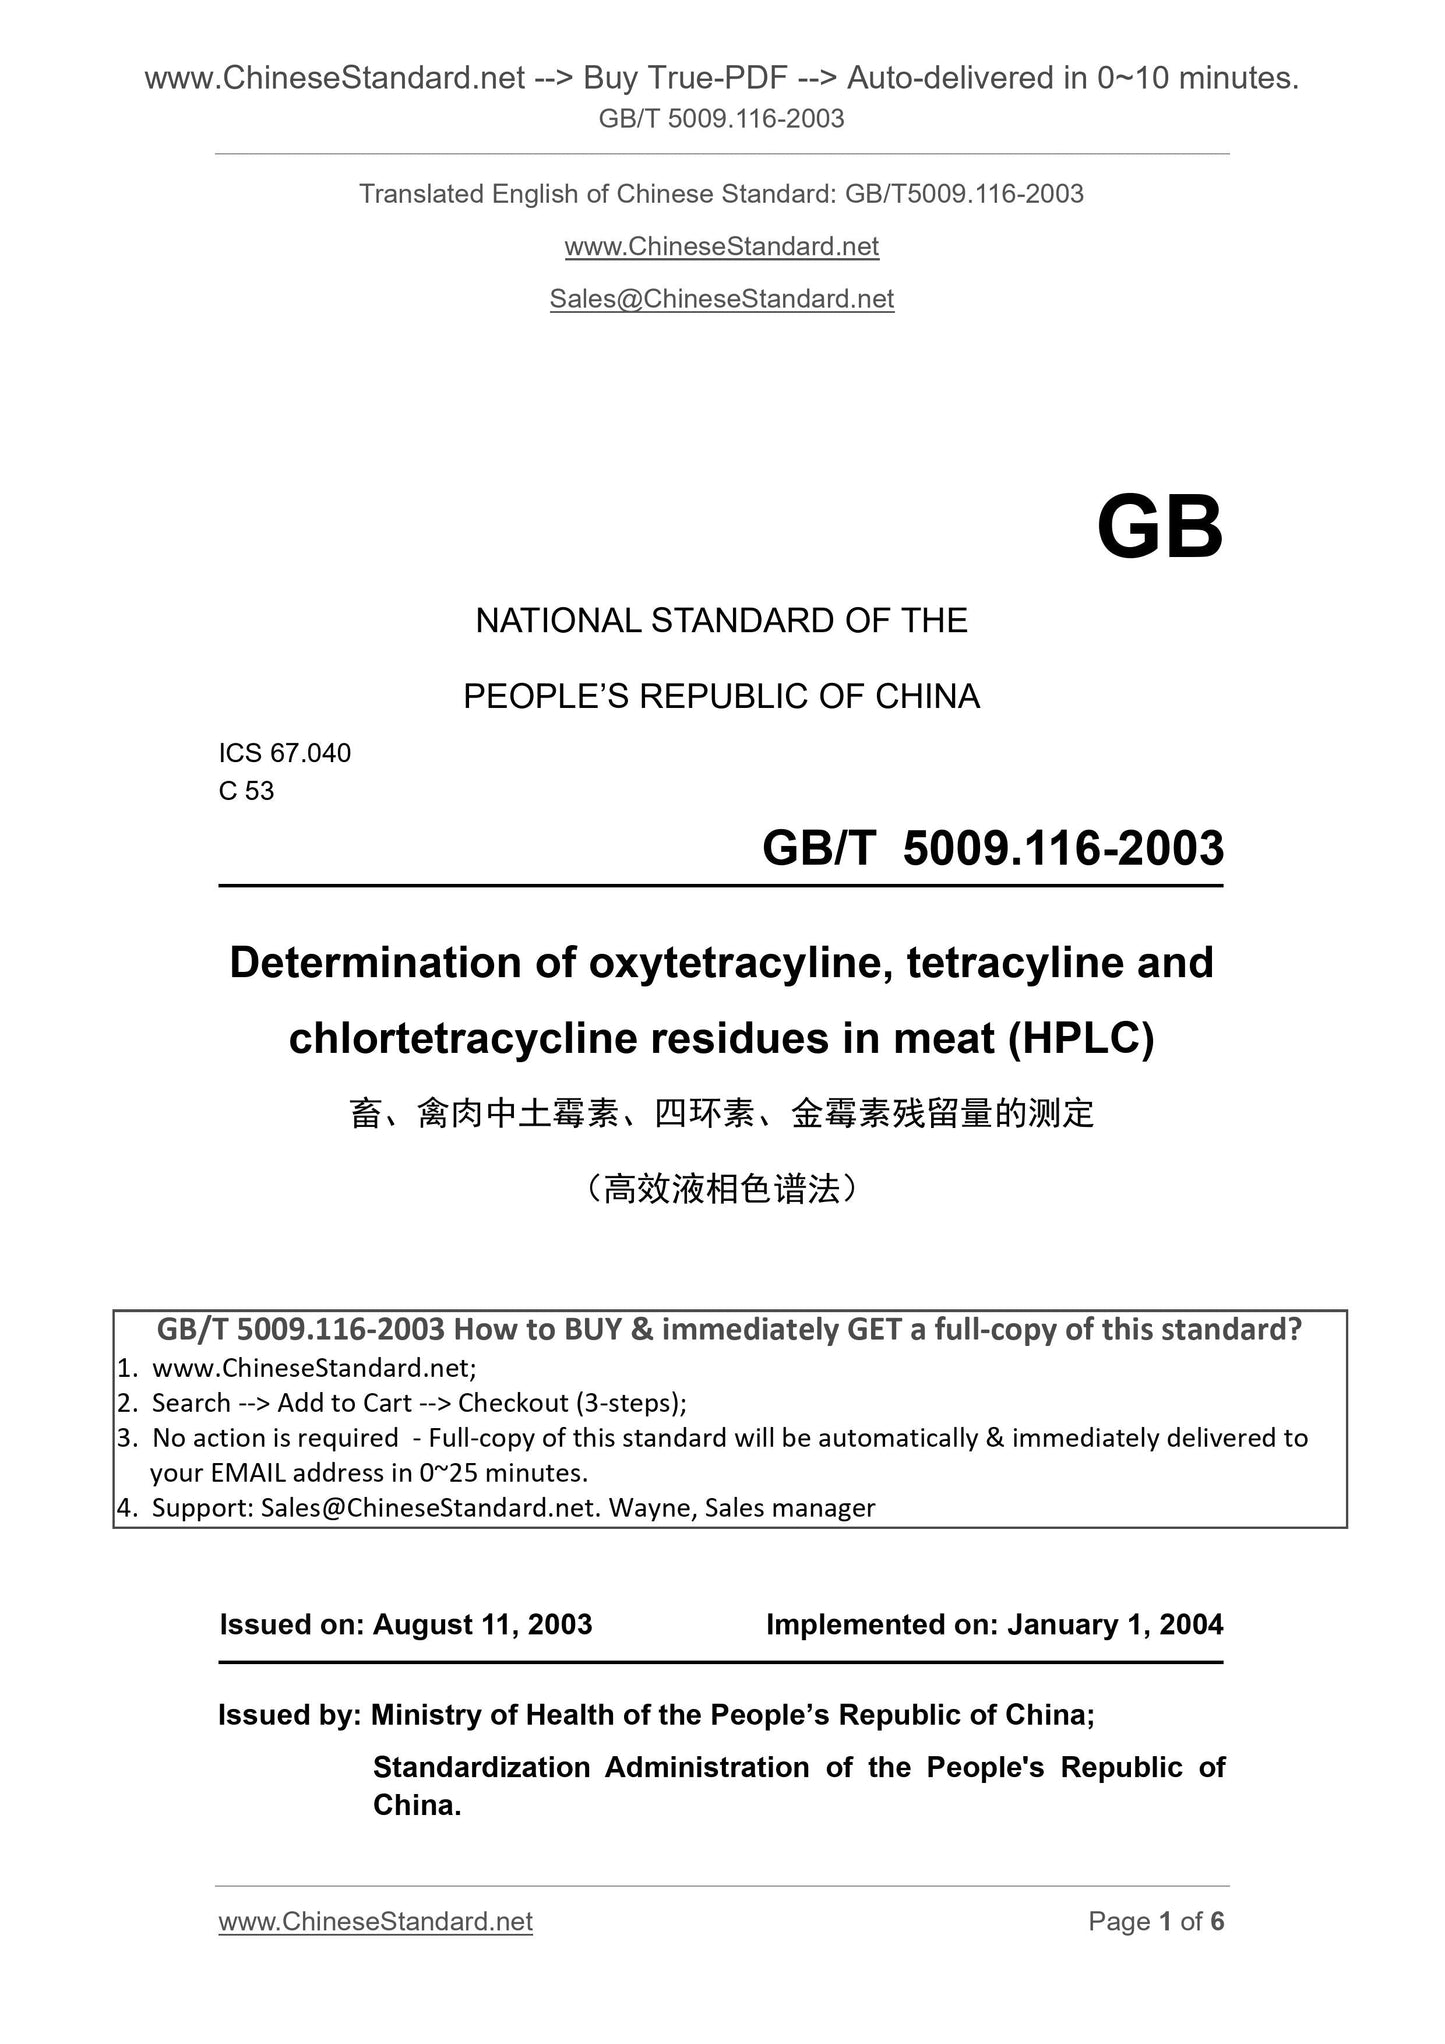 GB/T 5009.116-2003 Page 1